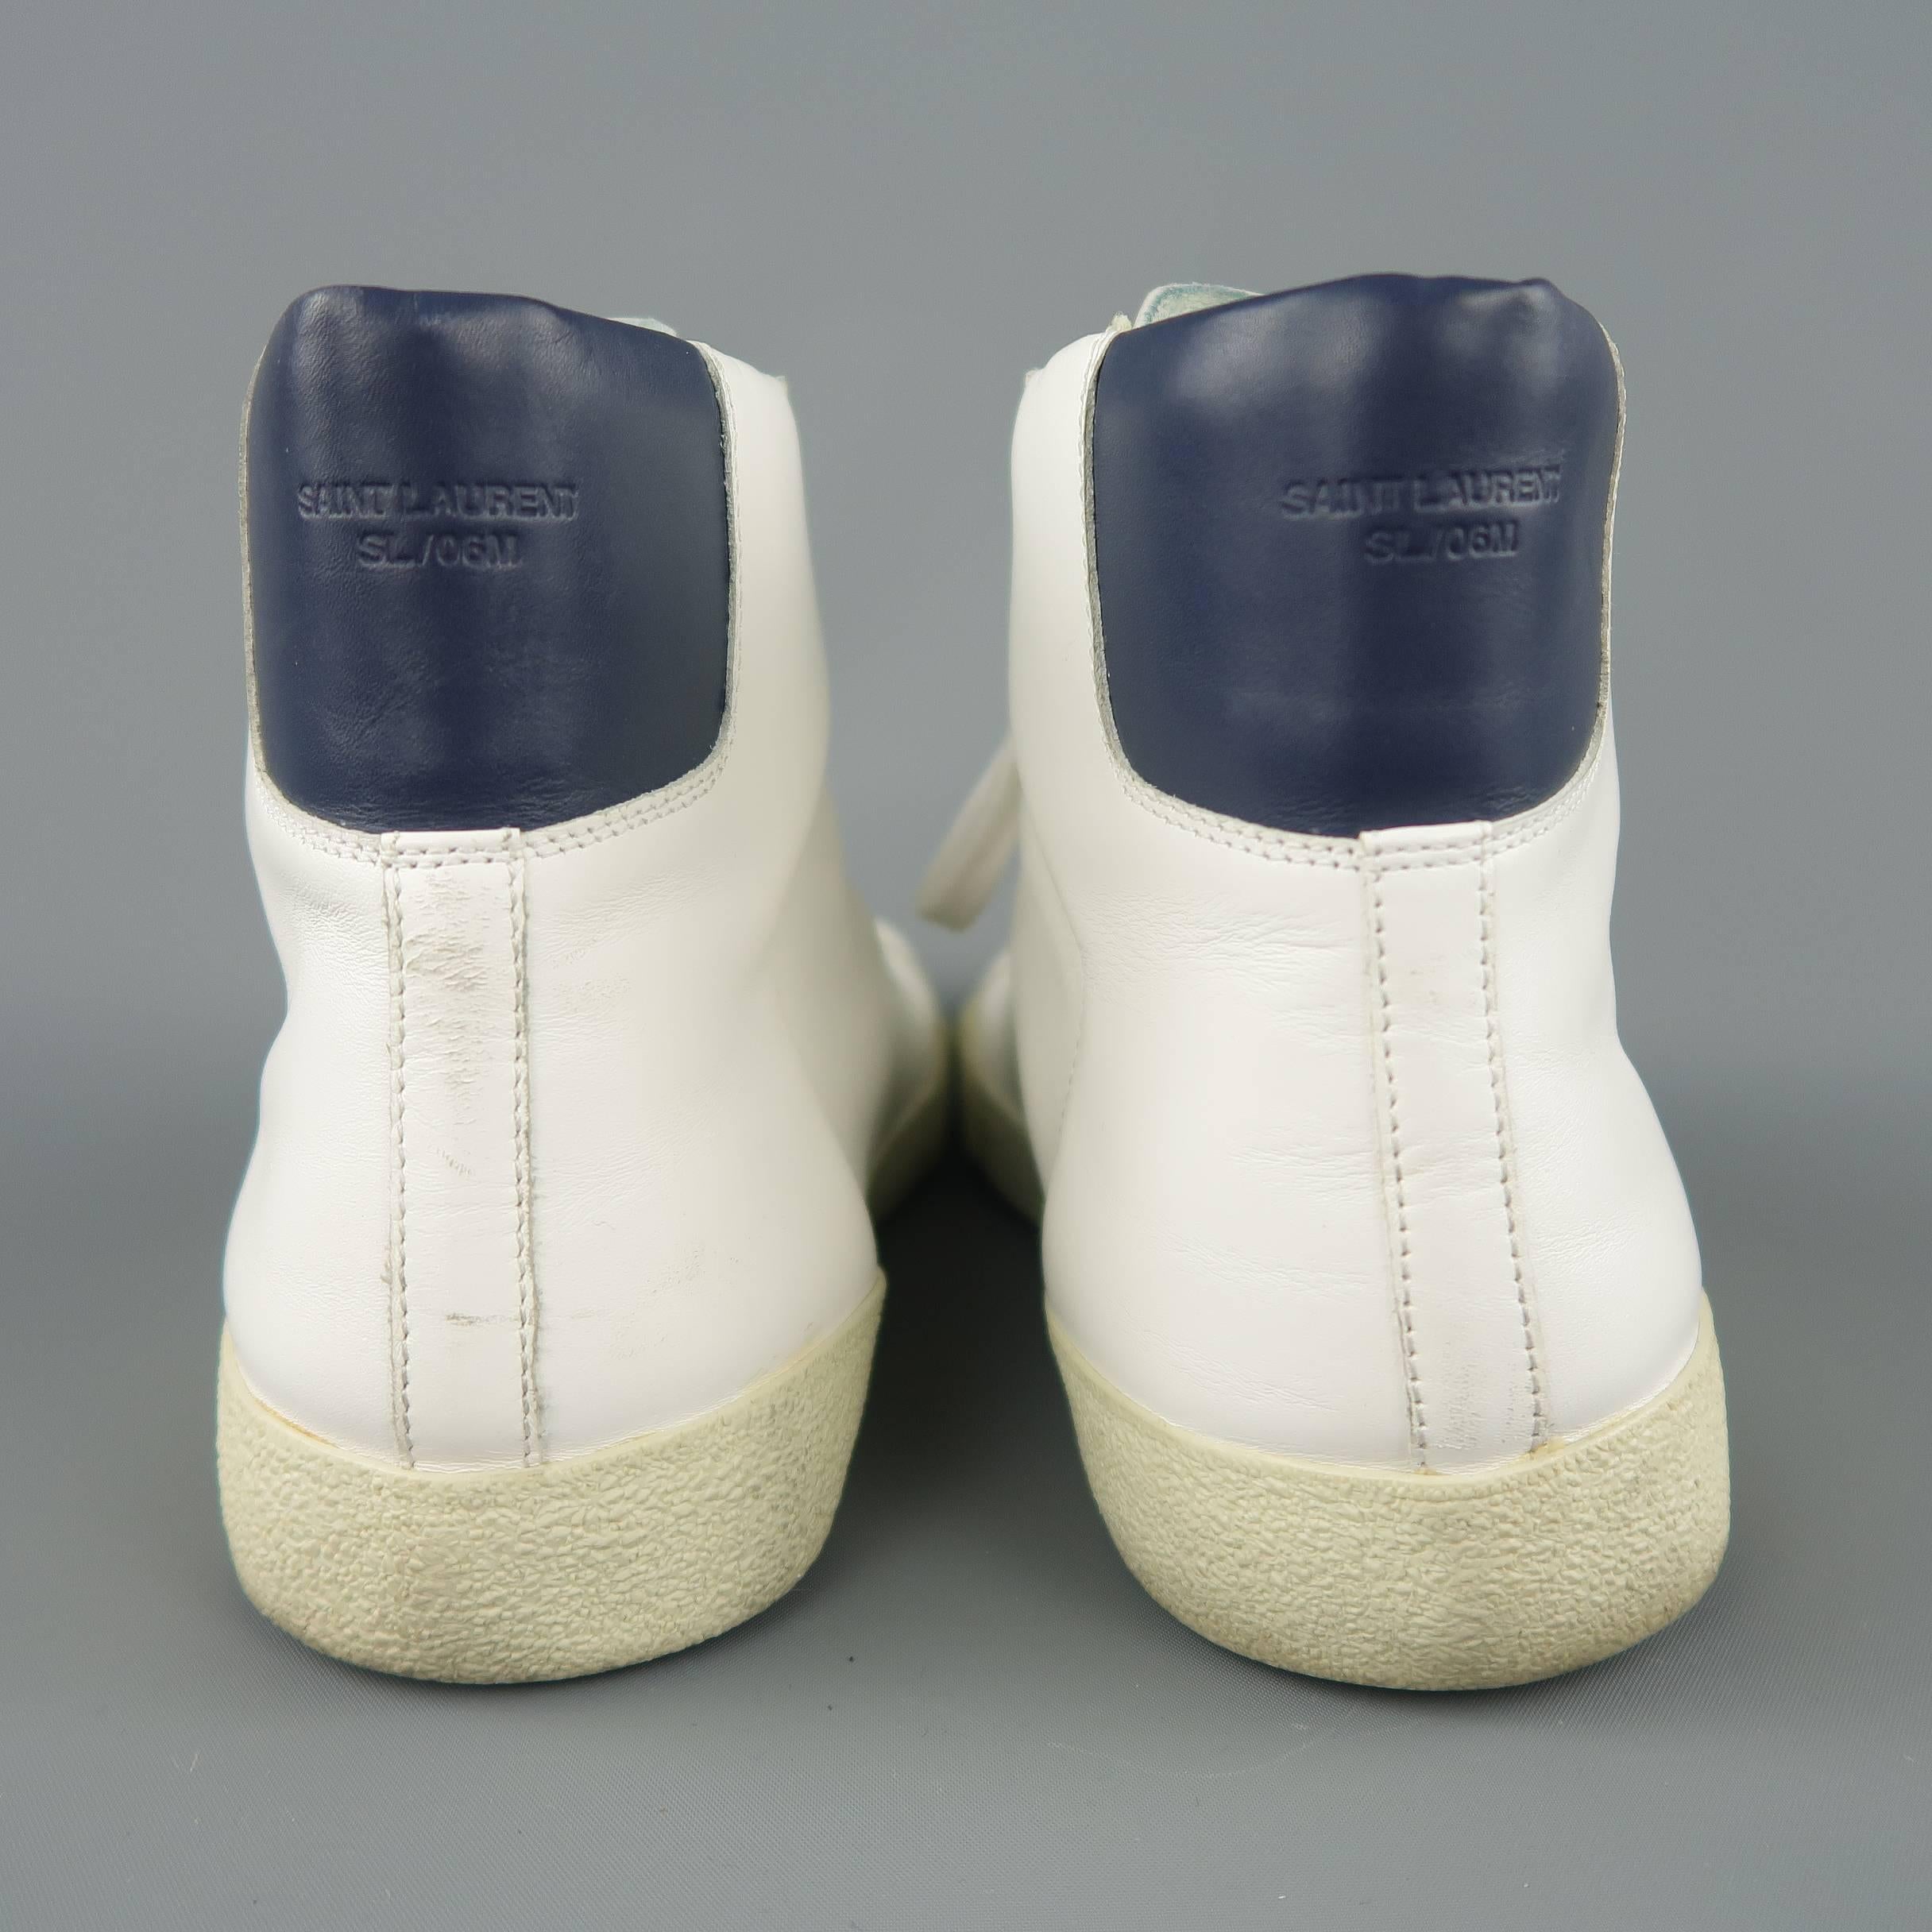 SAINT LAURENT SL/06M high top sneakers come in white leather with a beige rubber sole and a navy leather back panel. Wear throughout. As-is. Made in Italy.
 
Fair Pre-Owned Condition.
Marked: IT 43
 
Outsole: 11.5 x 4 in.
